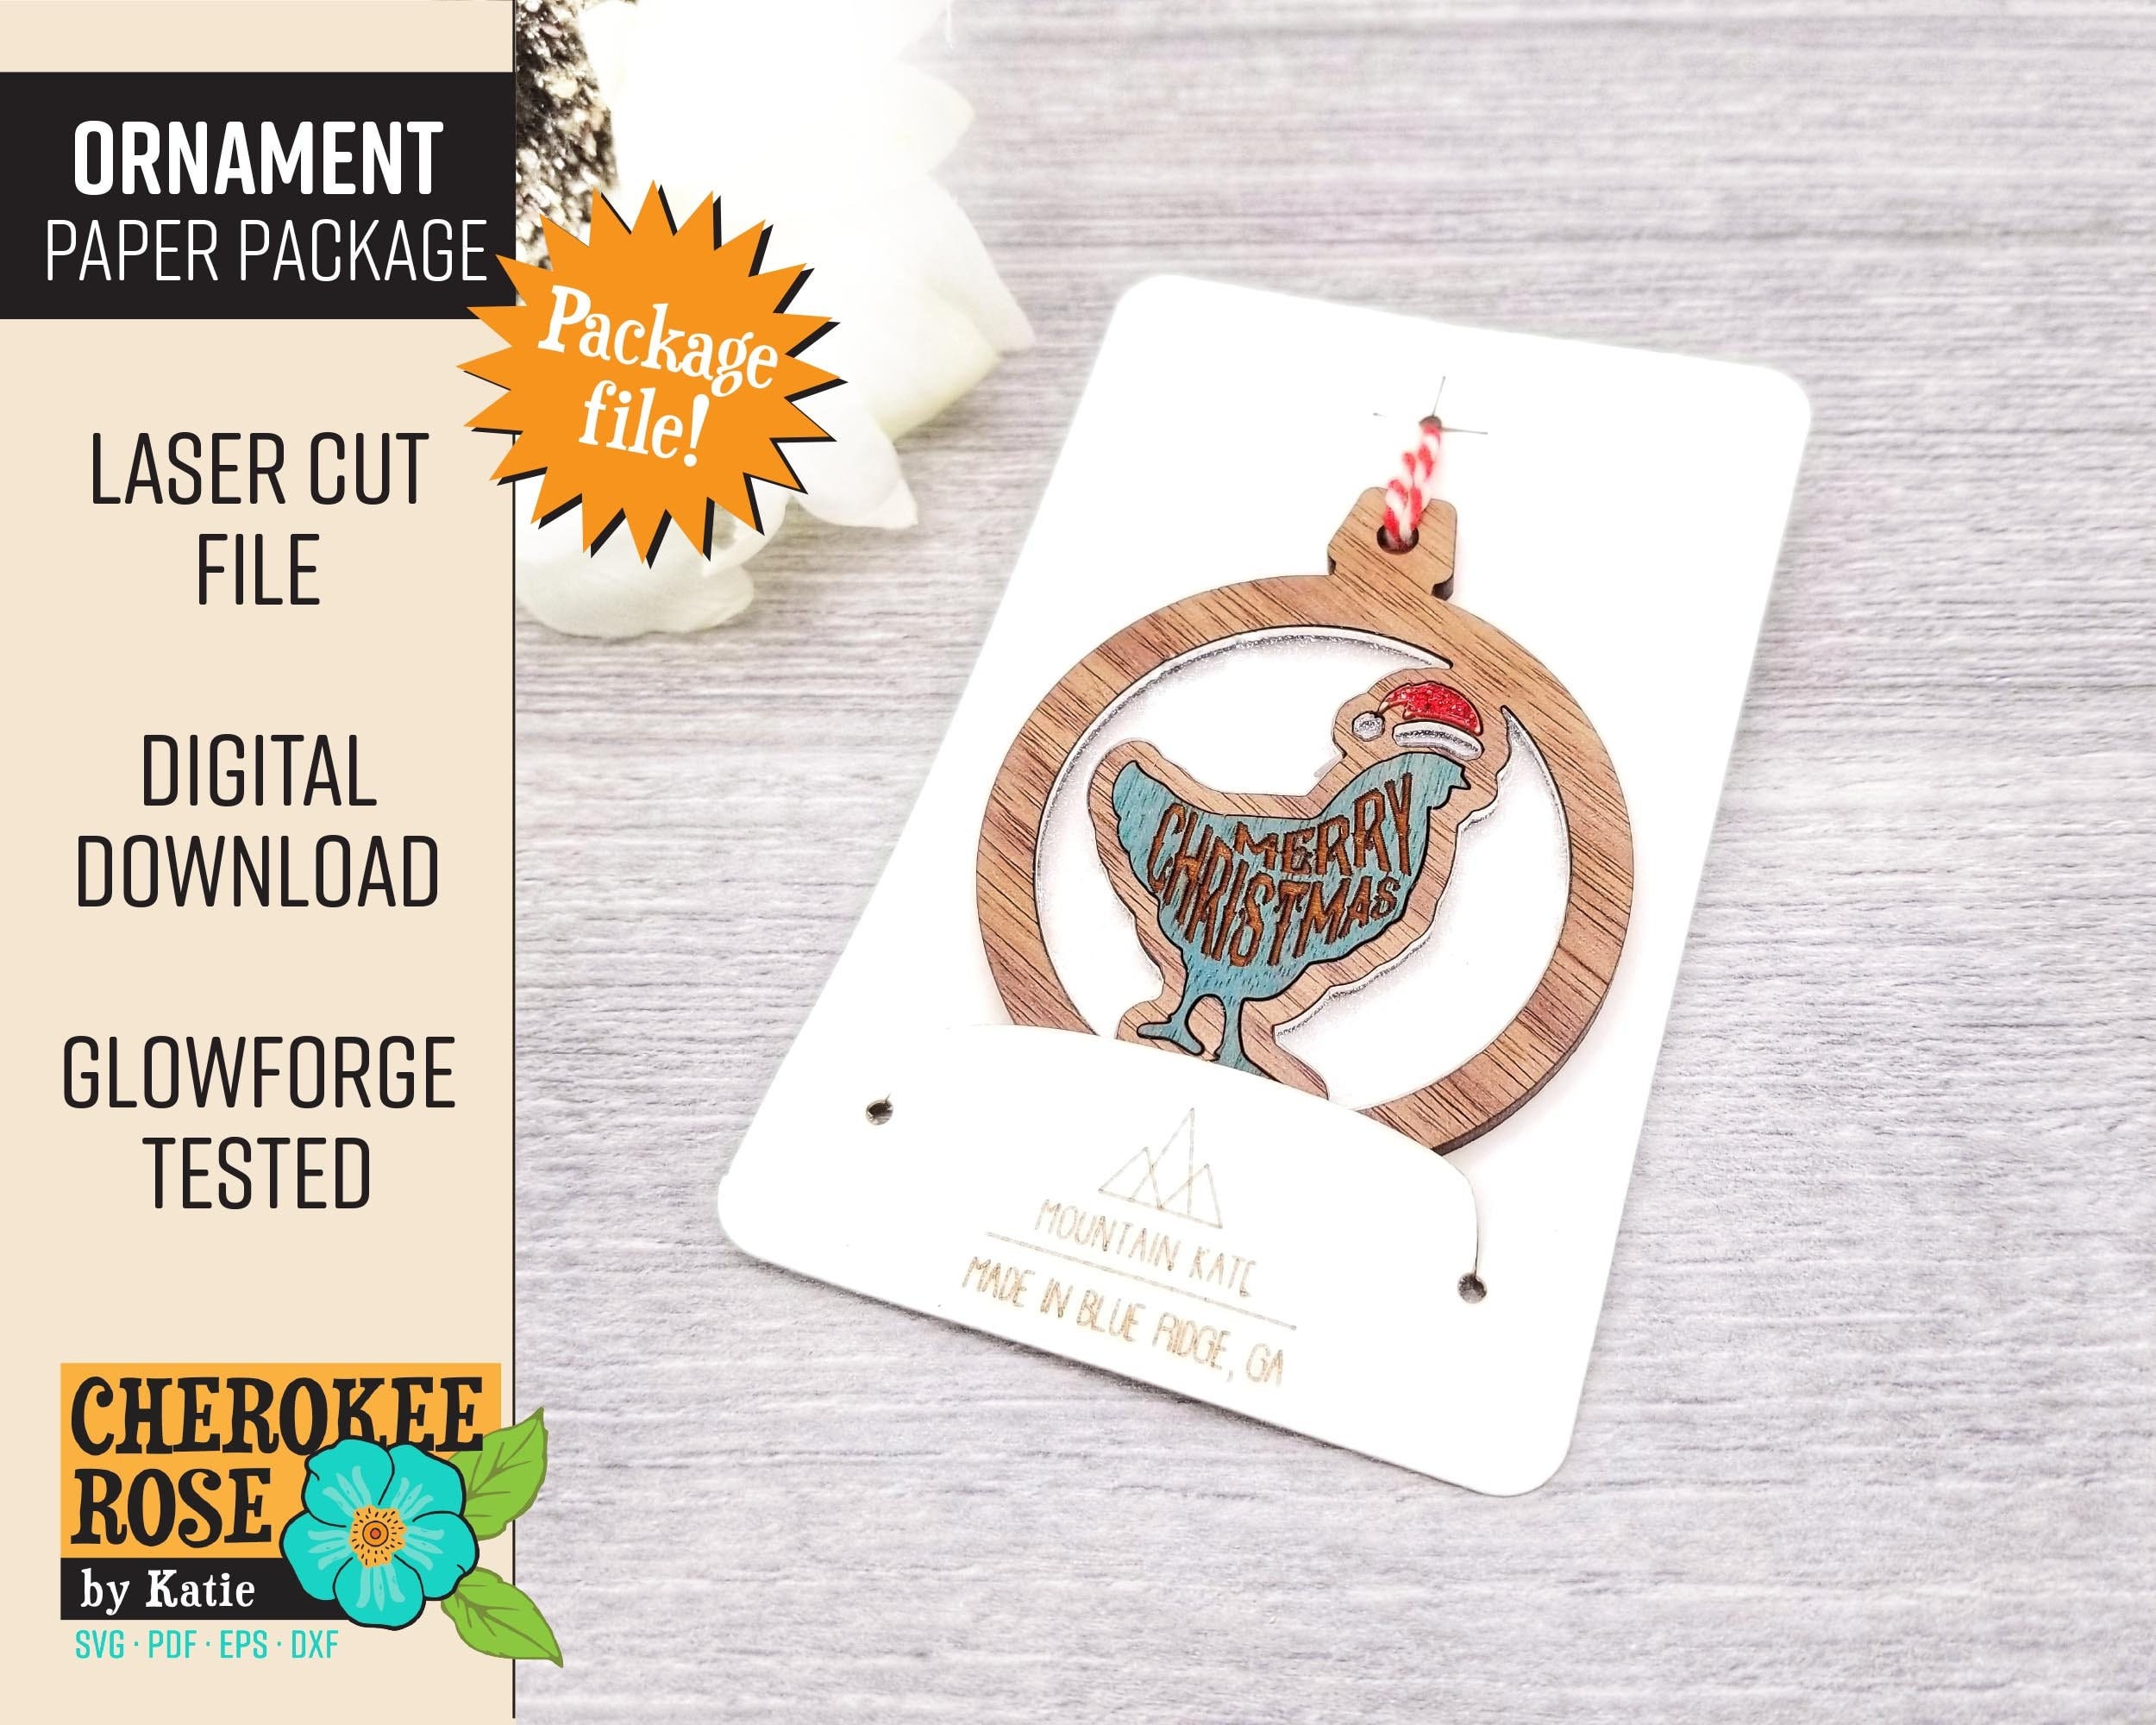 Christmas Ornament Package - Ornament Display - 2 sizes - Laser Cut Packaging - Laser File - PDF - SVG [Digital File Only]